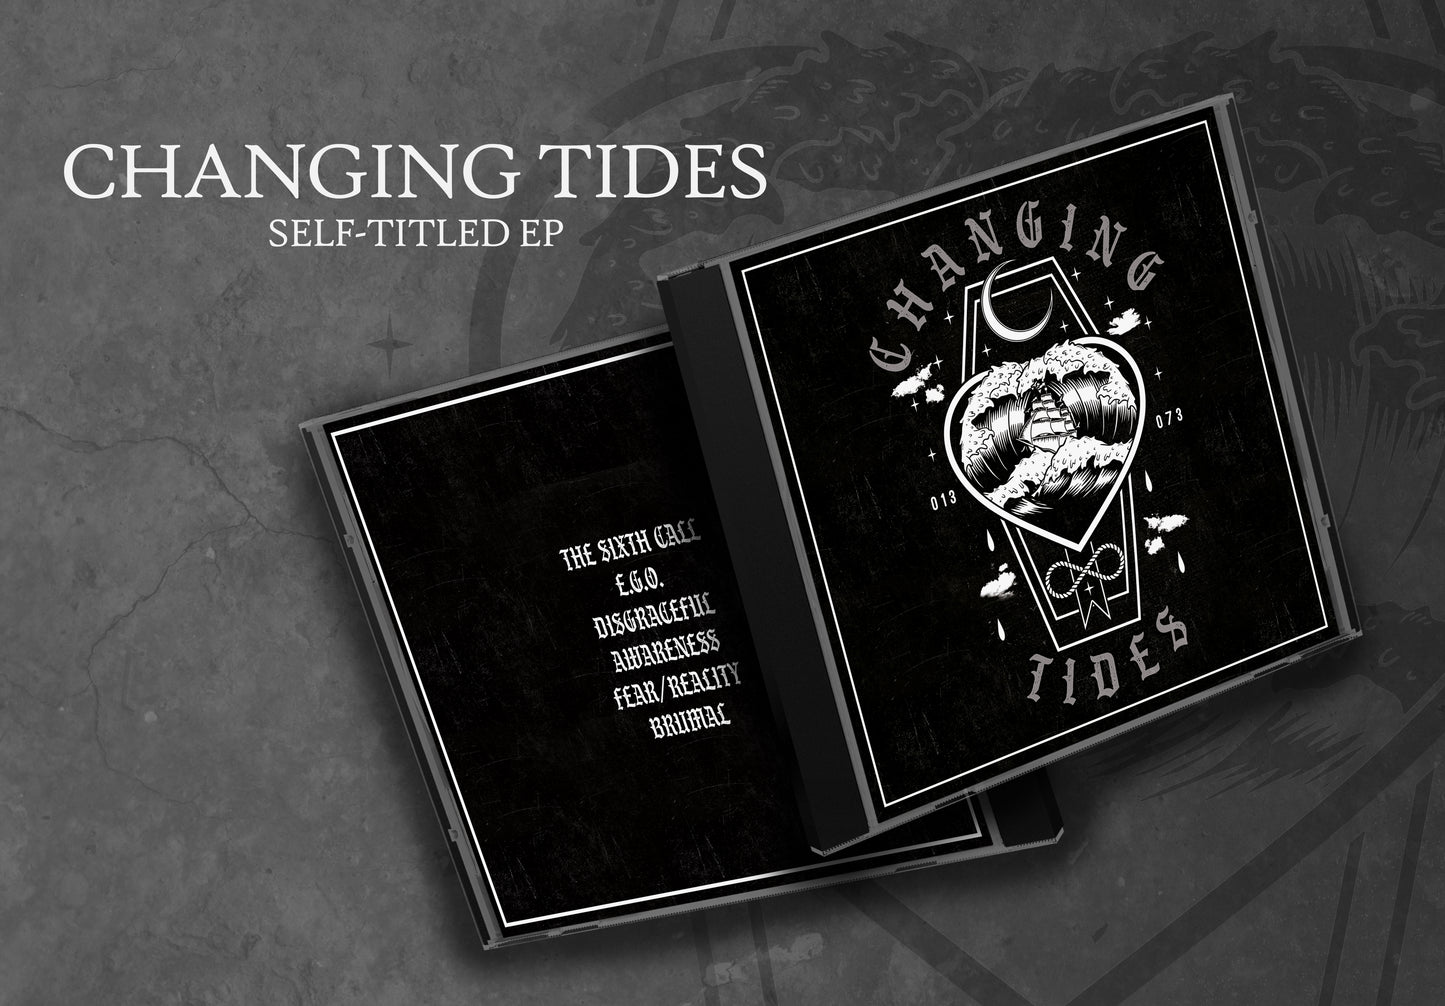 CD - Changing Tides EP